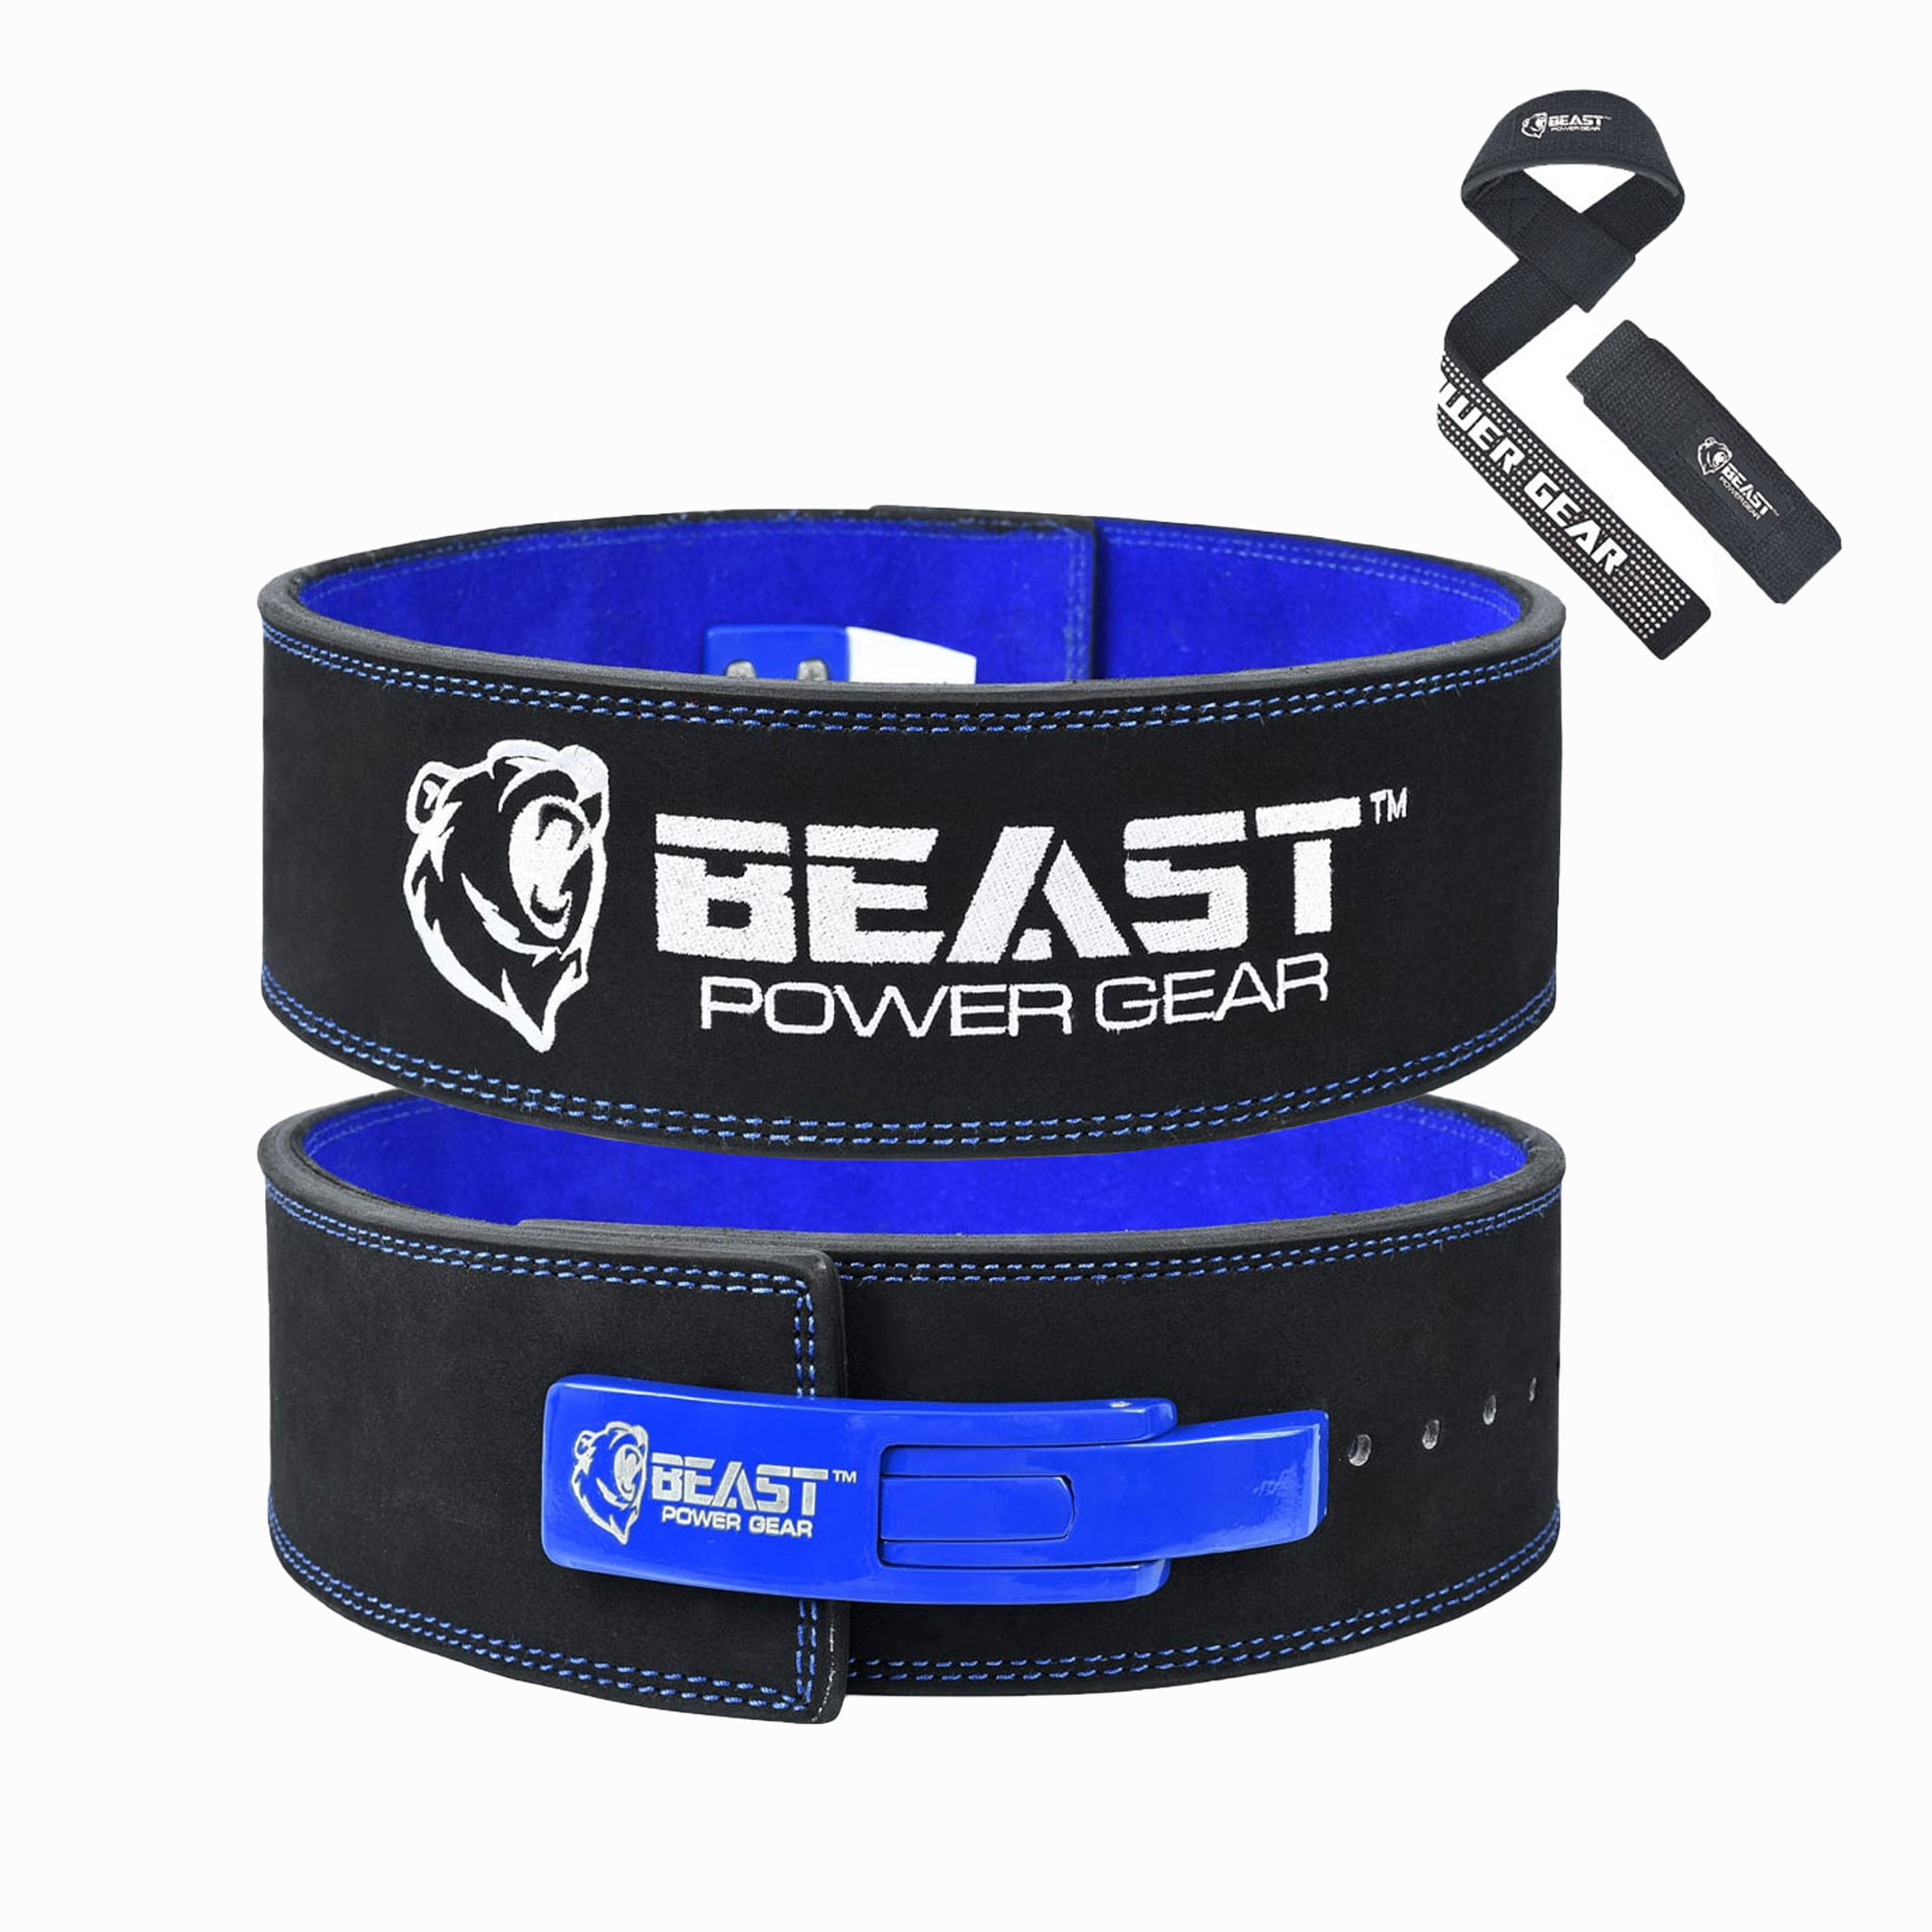 Deadlifts Men & Women Squats Beastpowergear Weight Lifting Belt with Lever Buckle|10MM Thick & 4 Inches Wide|Free Strap- Advanced Back Support for Weightlifting Powerlifting 